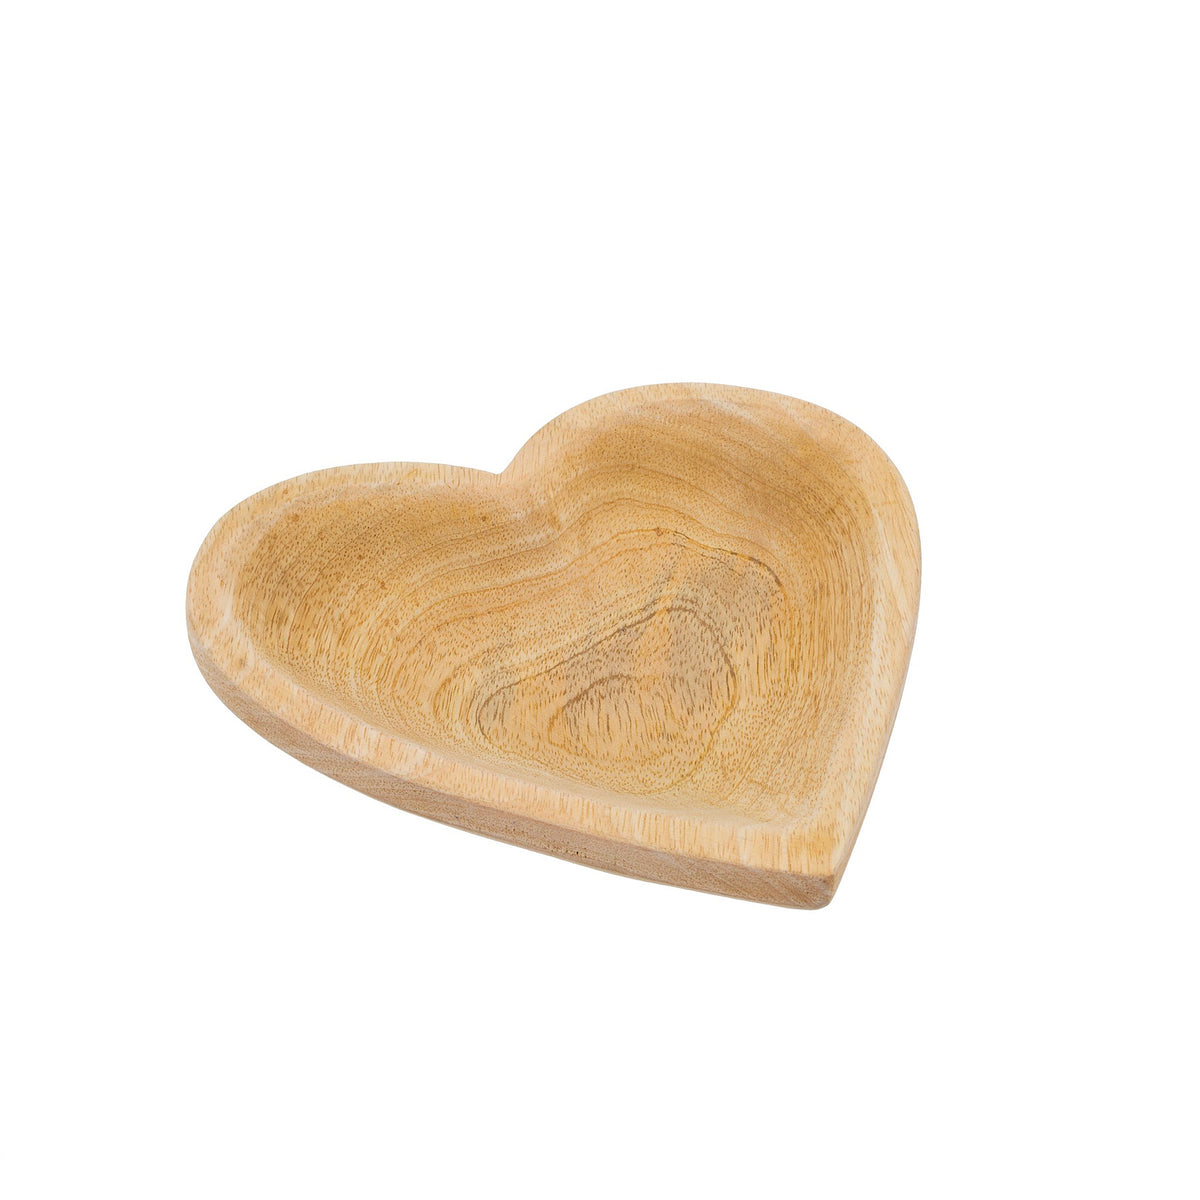 Wild Heart Plate, Small